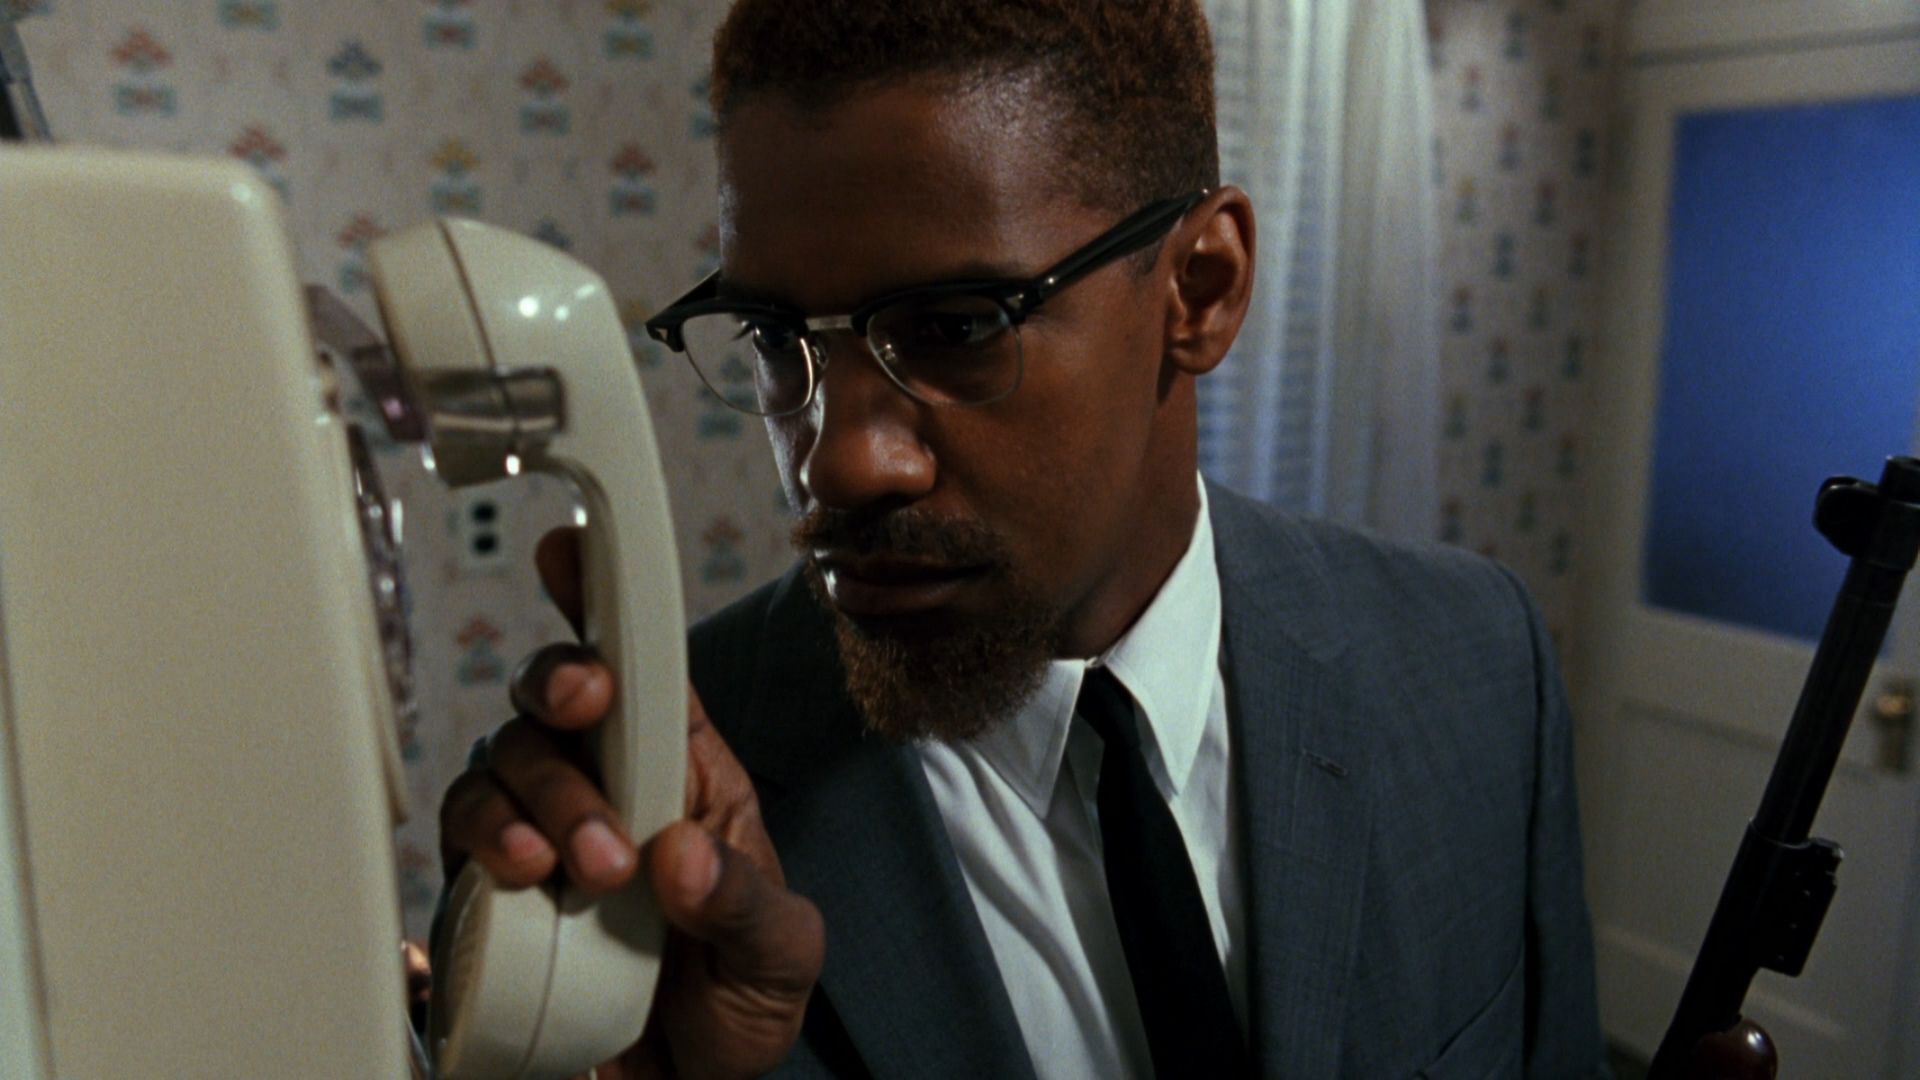 Malcolm X hangs up the phone in his kitchen